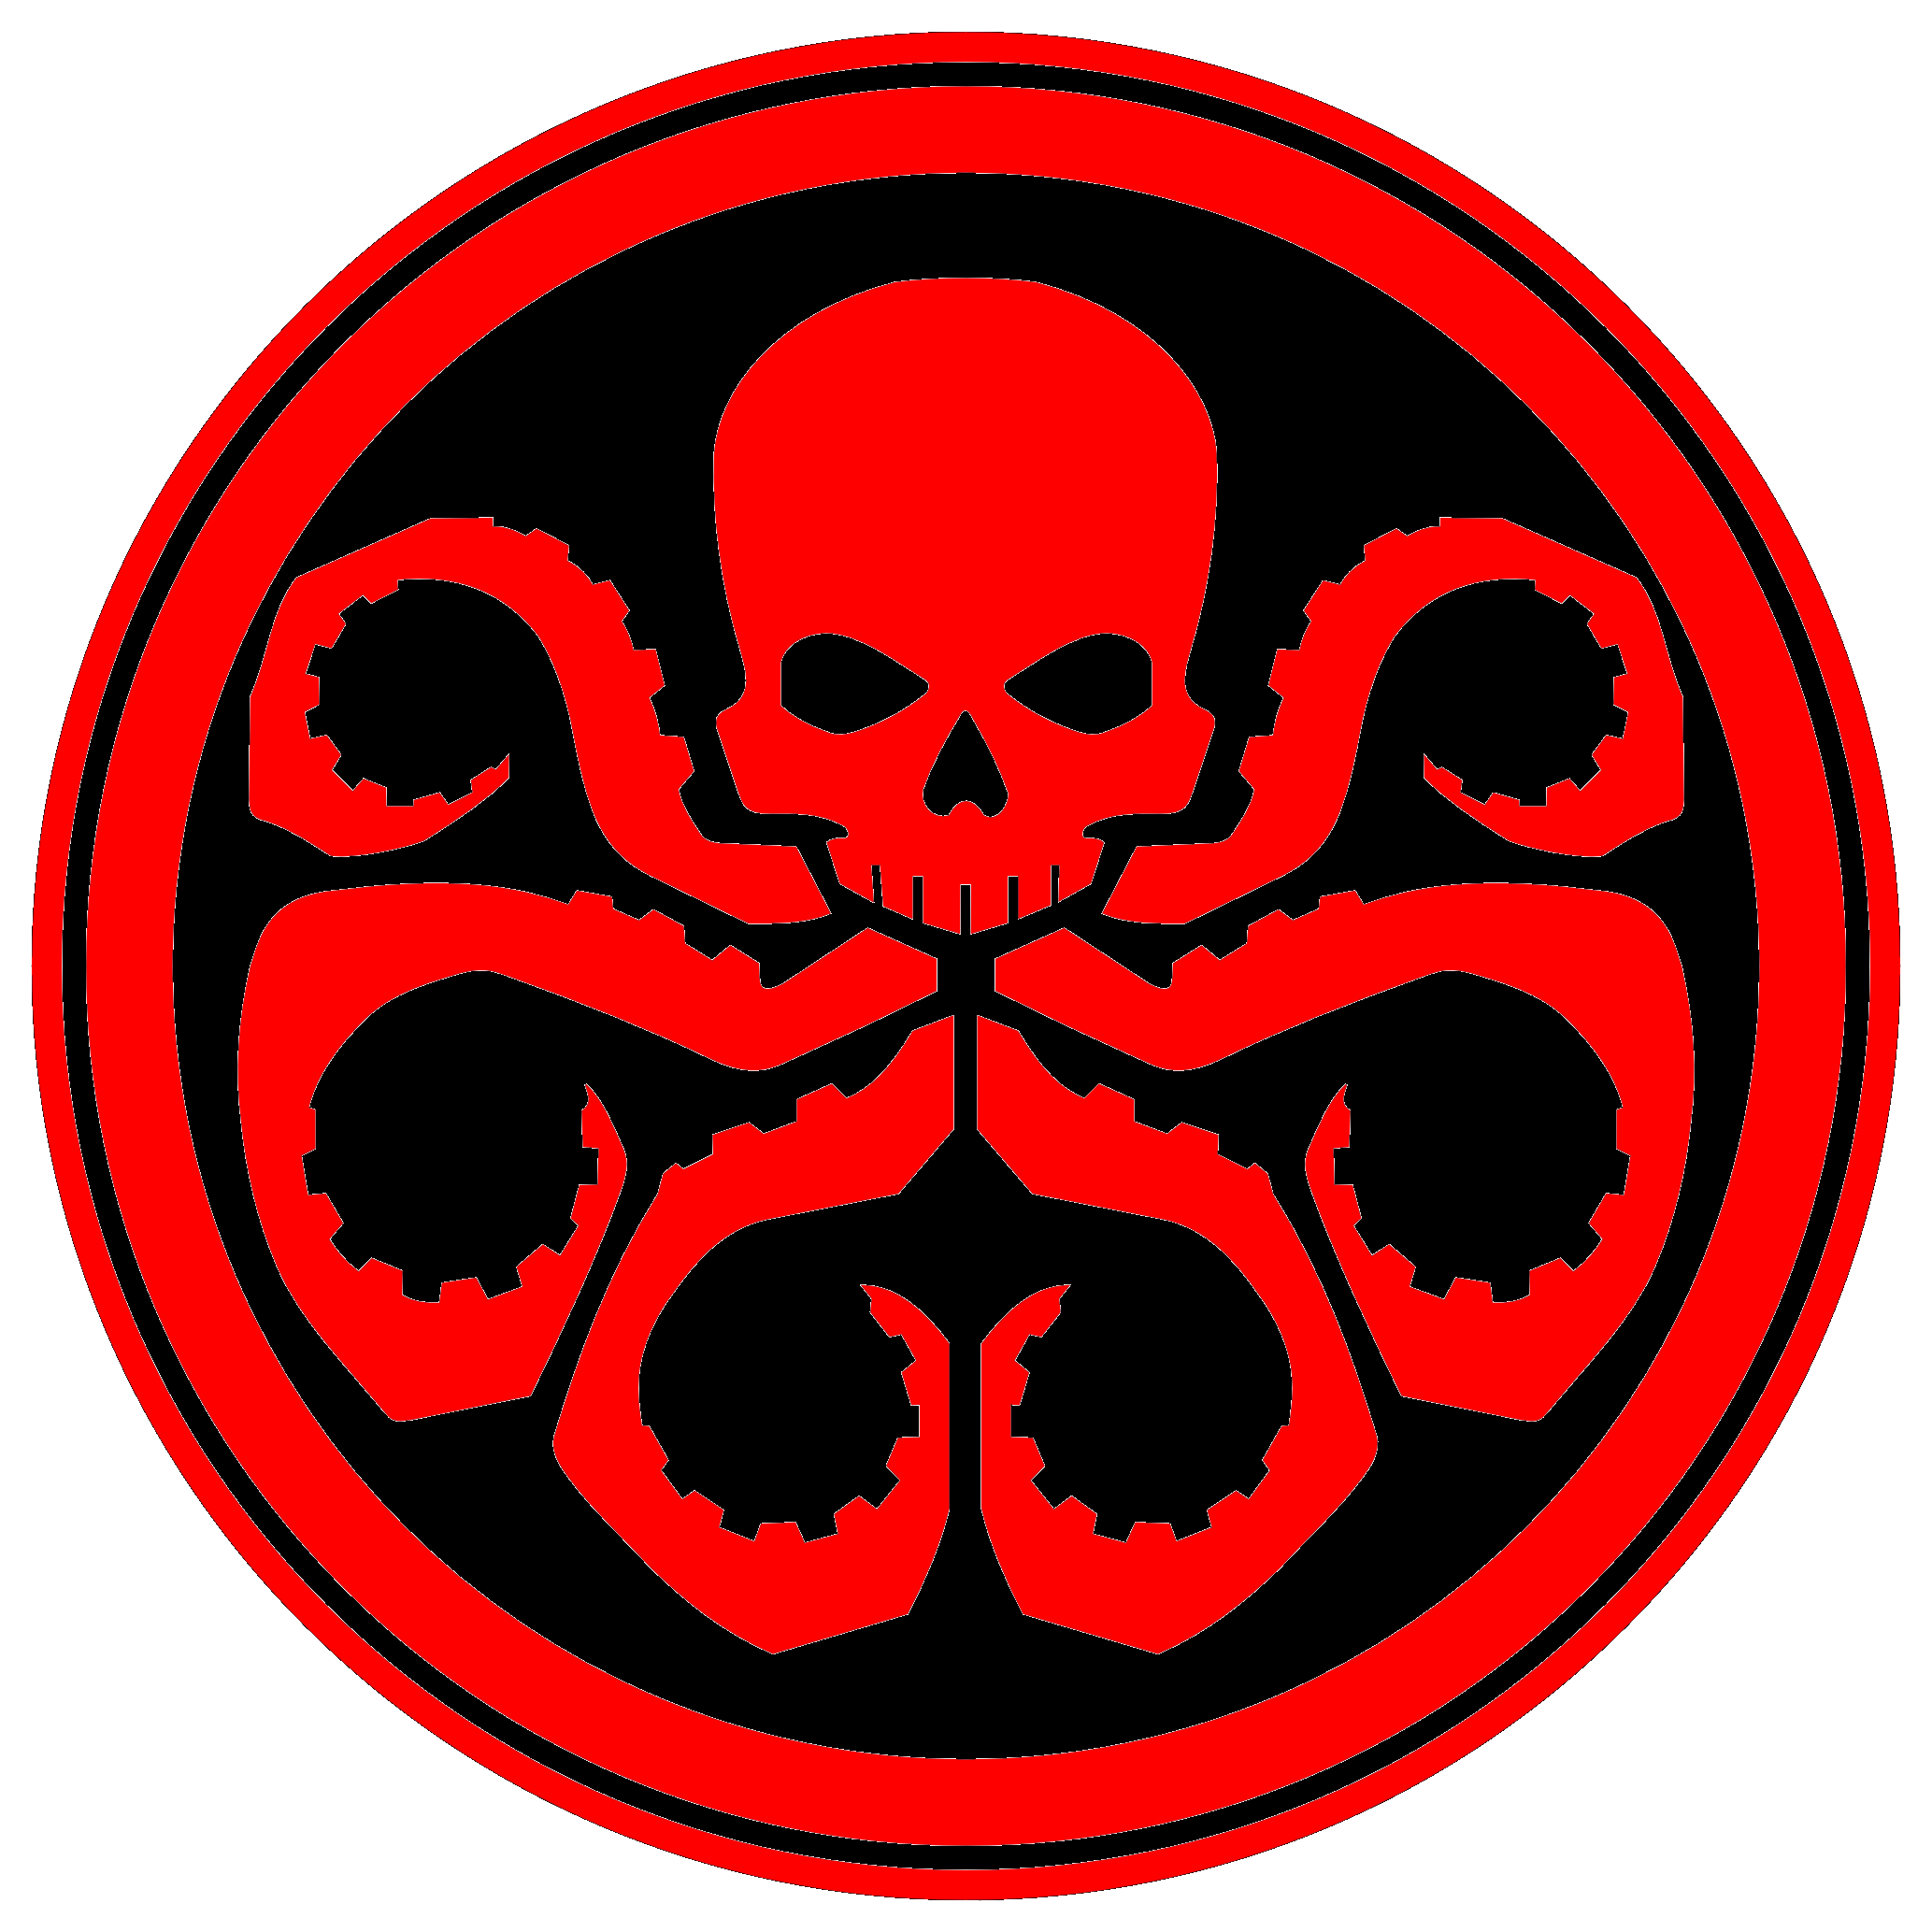 http://img2.wikia.nocookie.net/__cb20120709063105/marvelcinematicuniverse/images/8/82/Hydra_logo.png